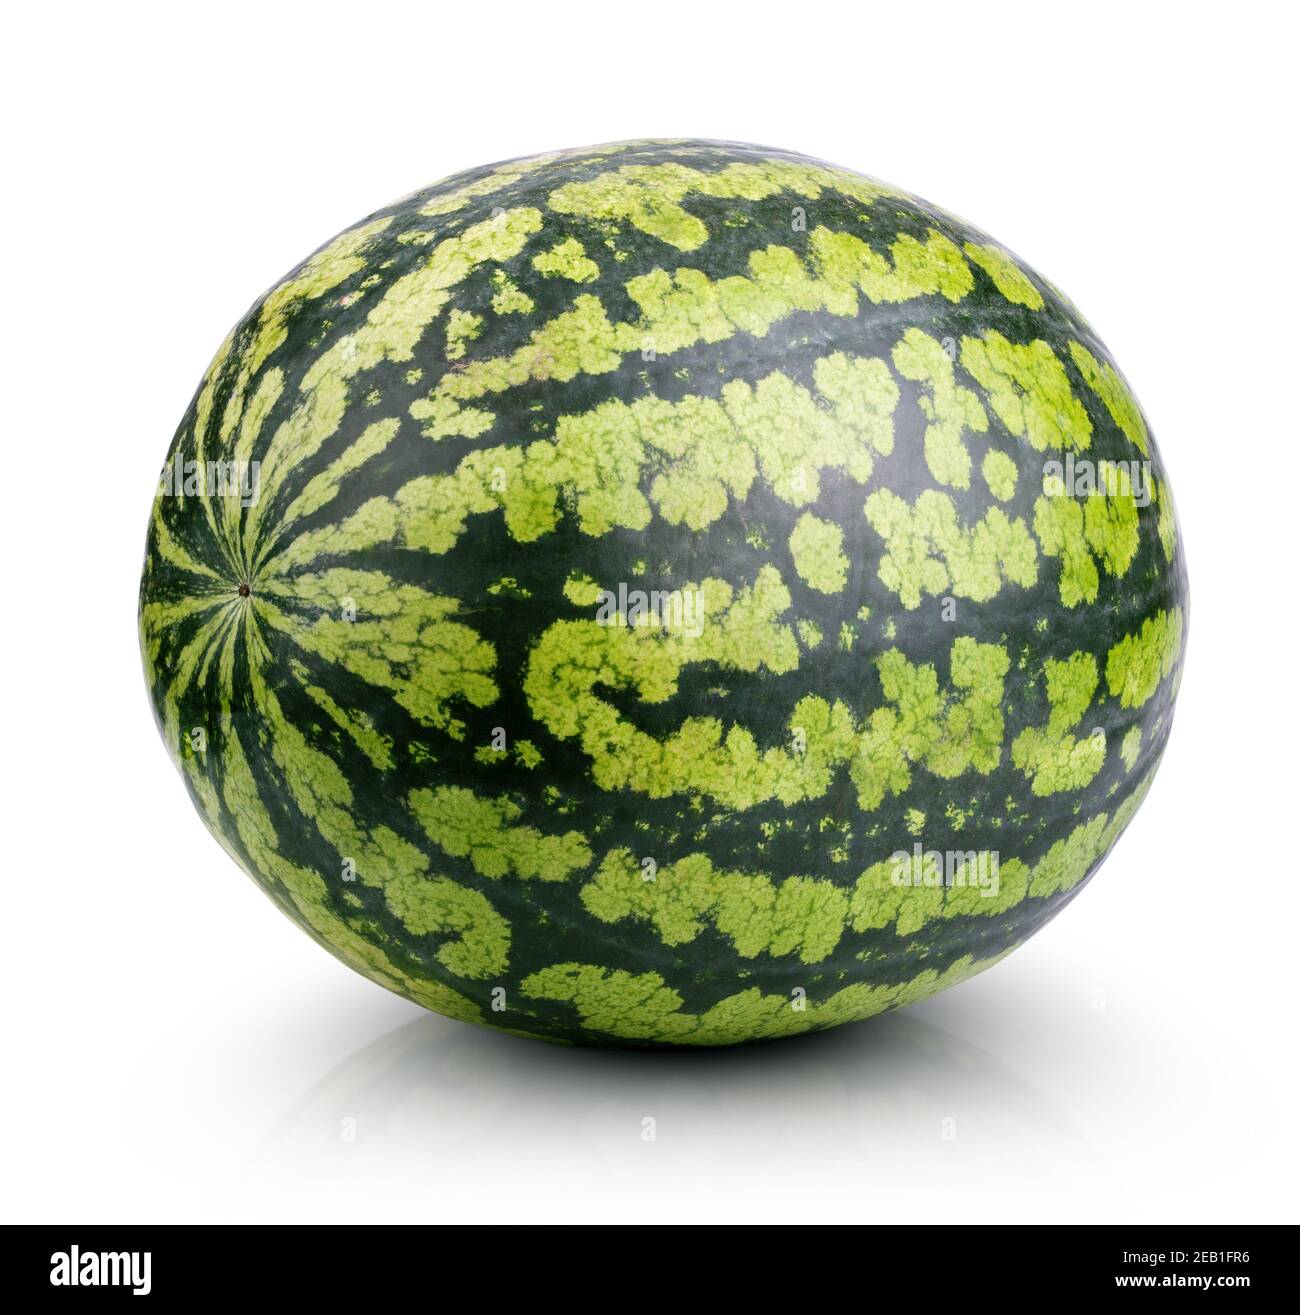 Single ripe watermelon isolated on white background with clipping path Stock Photo